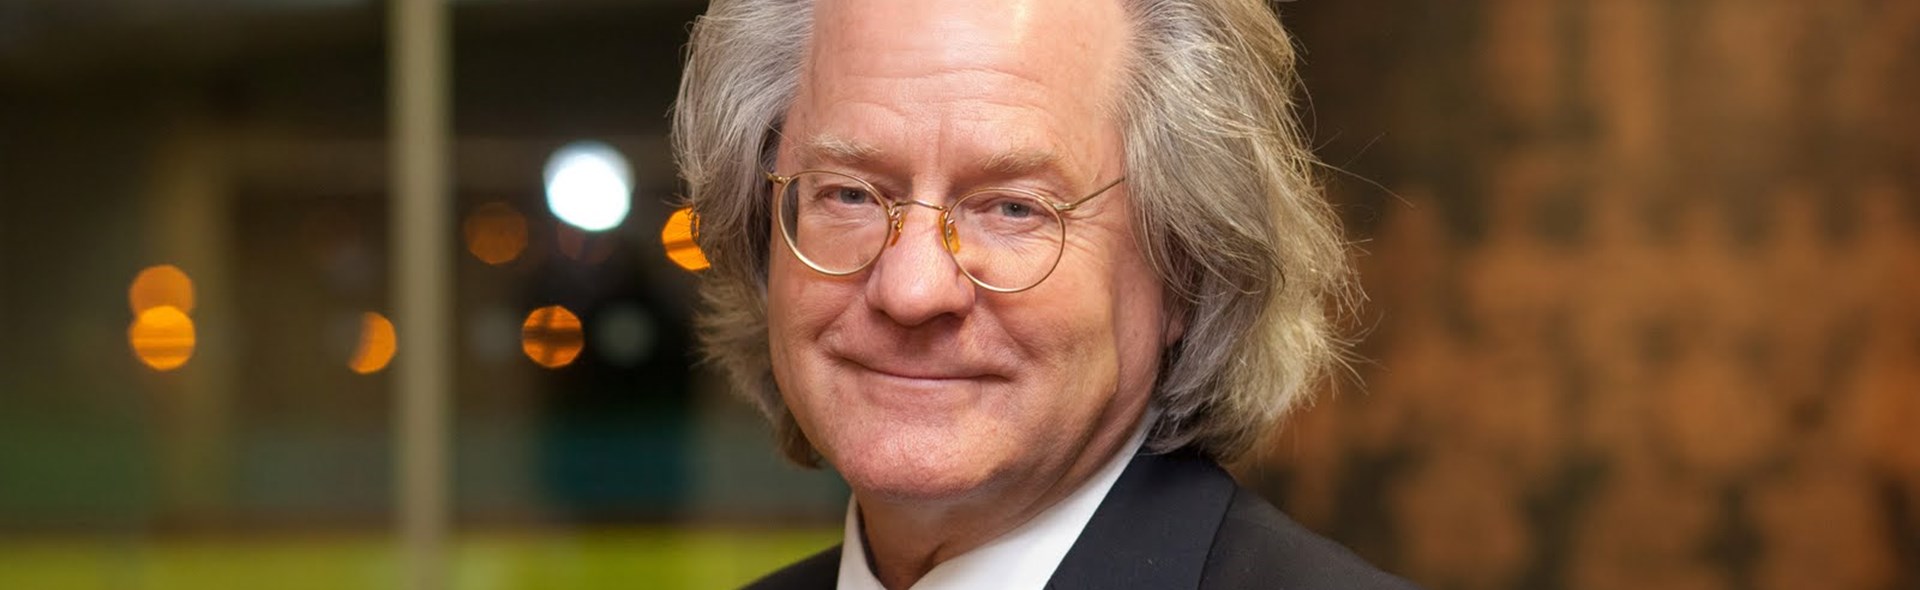 AC Grayling - For The Good of the World